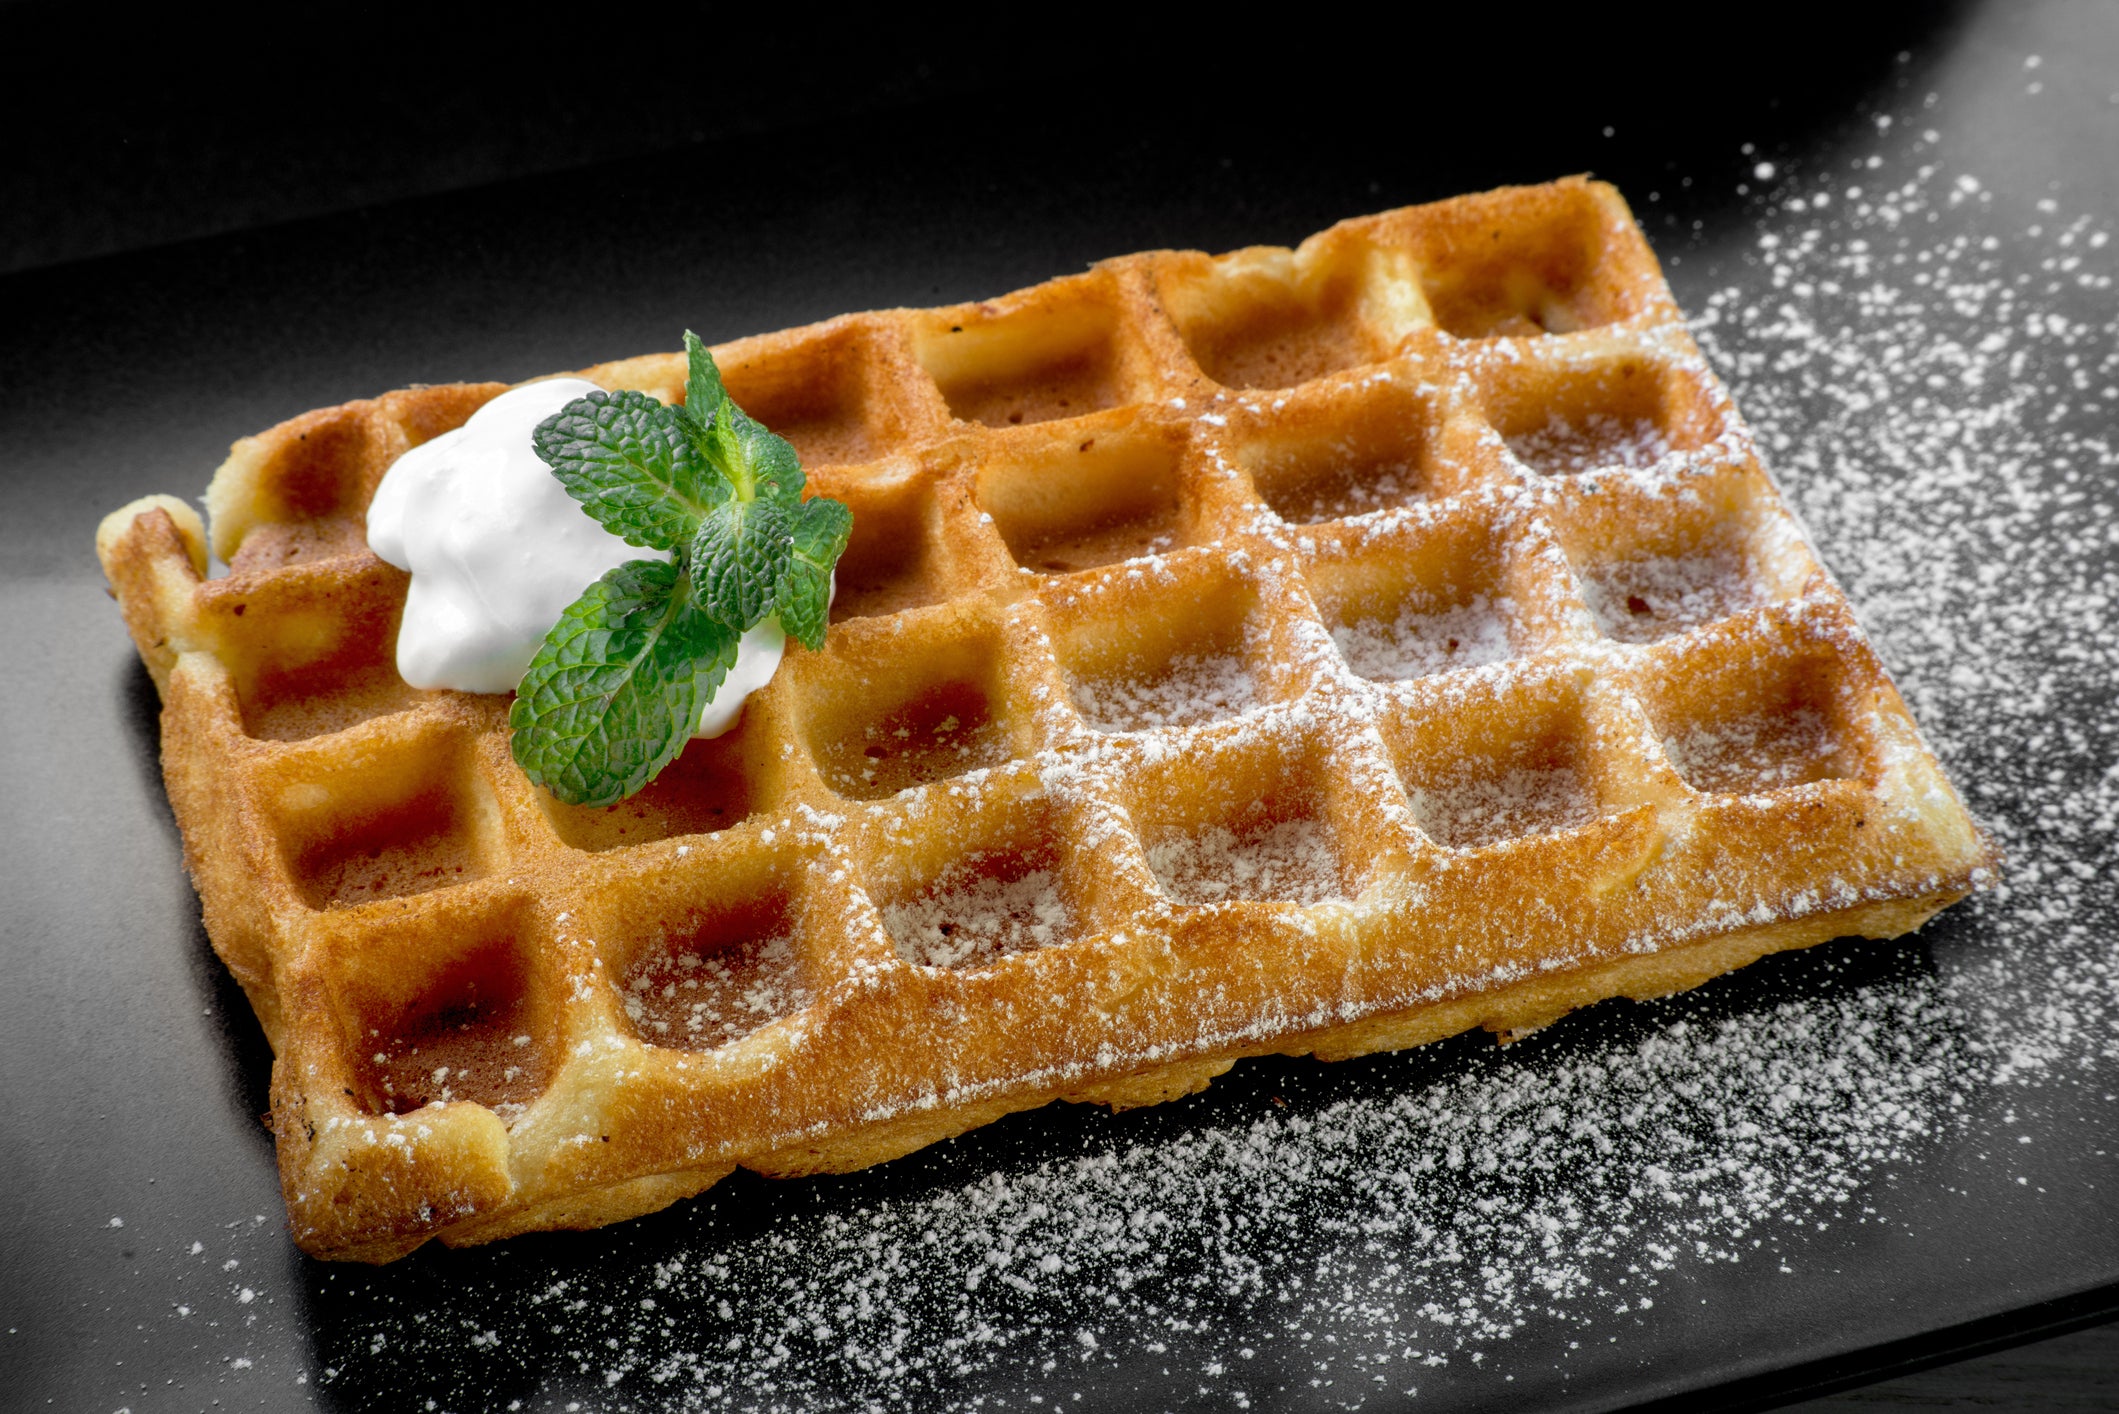 Brussels waffle garnished with mint and cream